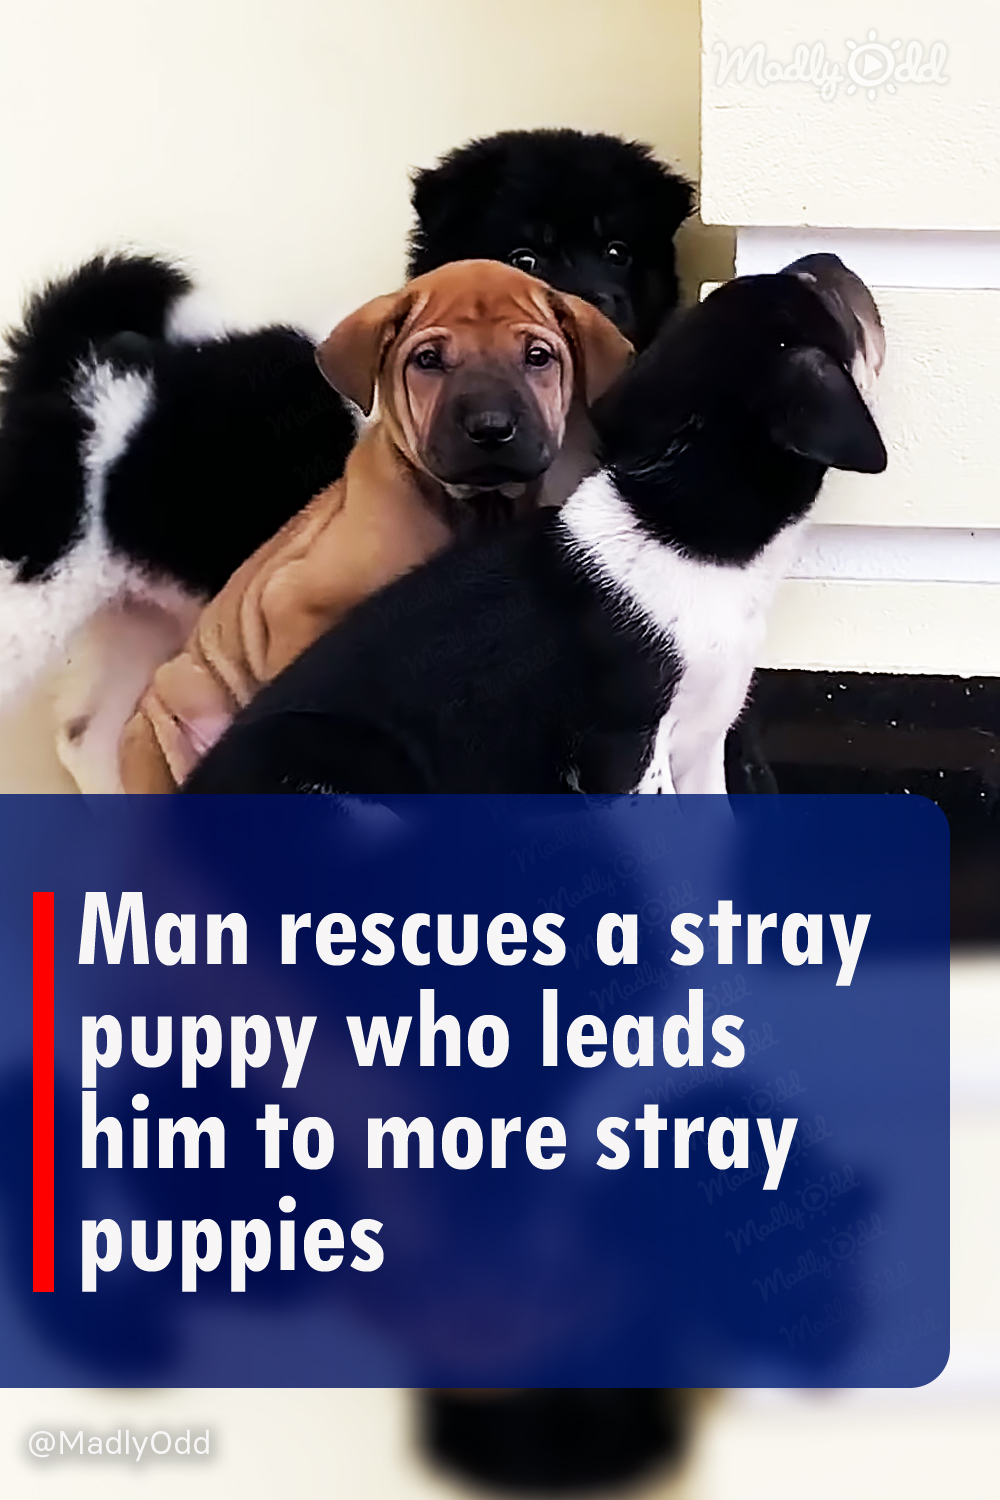 Man rescues a stray puppy who leads him to more stray puppies